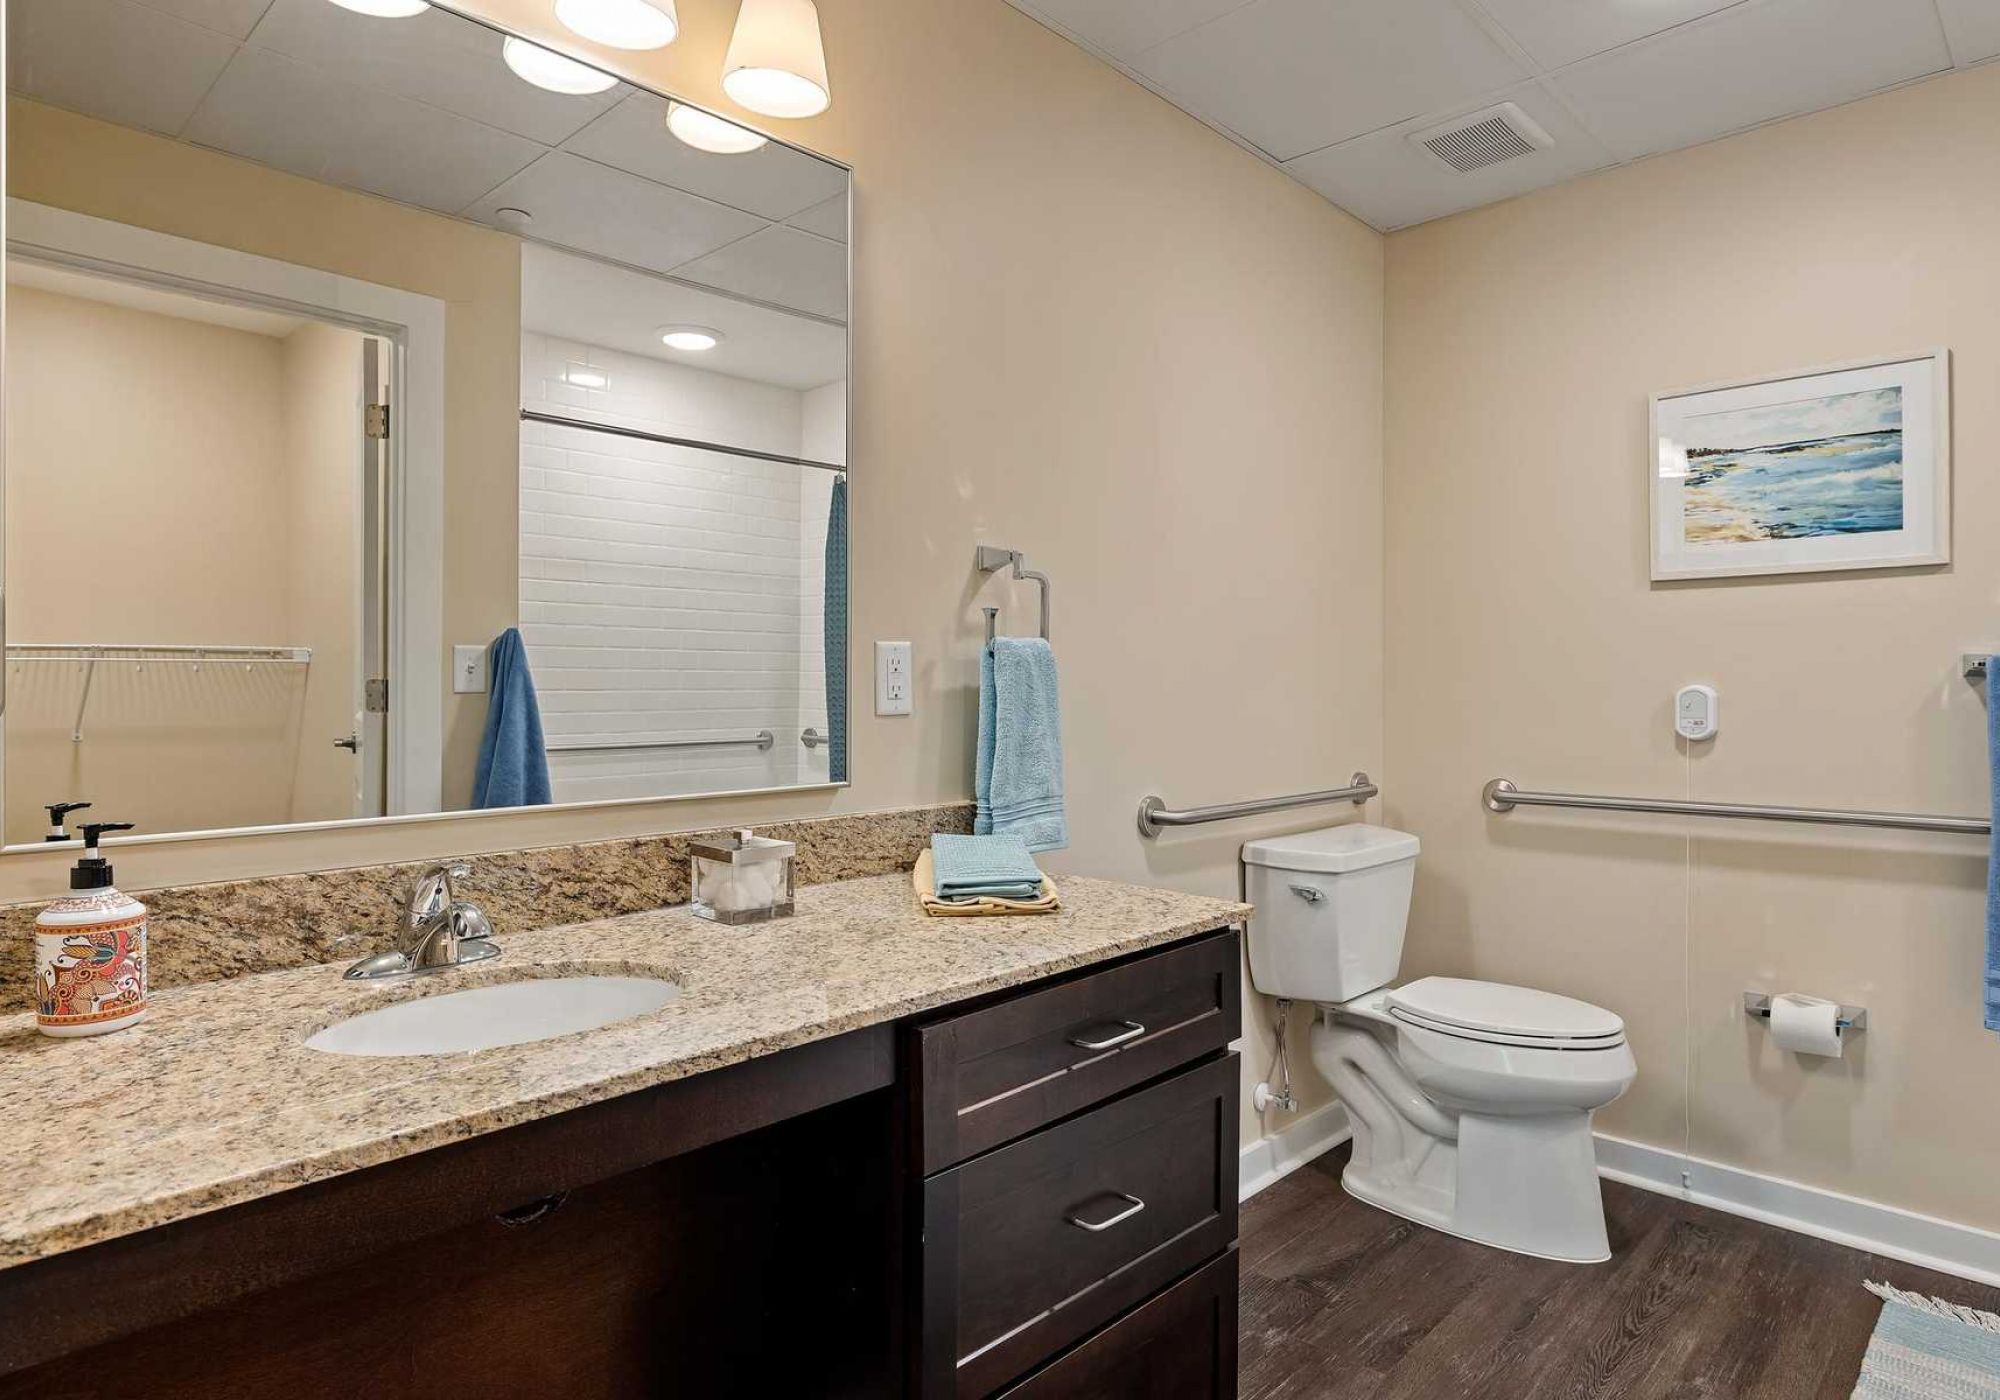 The Claiborne at Newnan Lakes senior living community bathroom showing accessibility features including handrails, lower sink height, and zero-entry shower